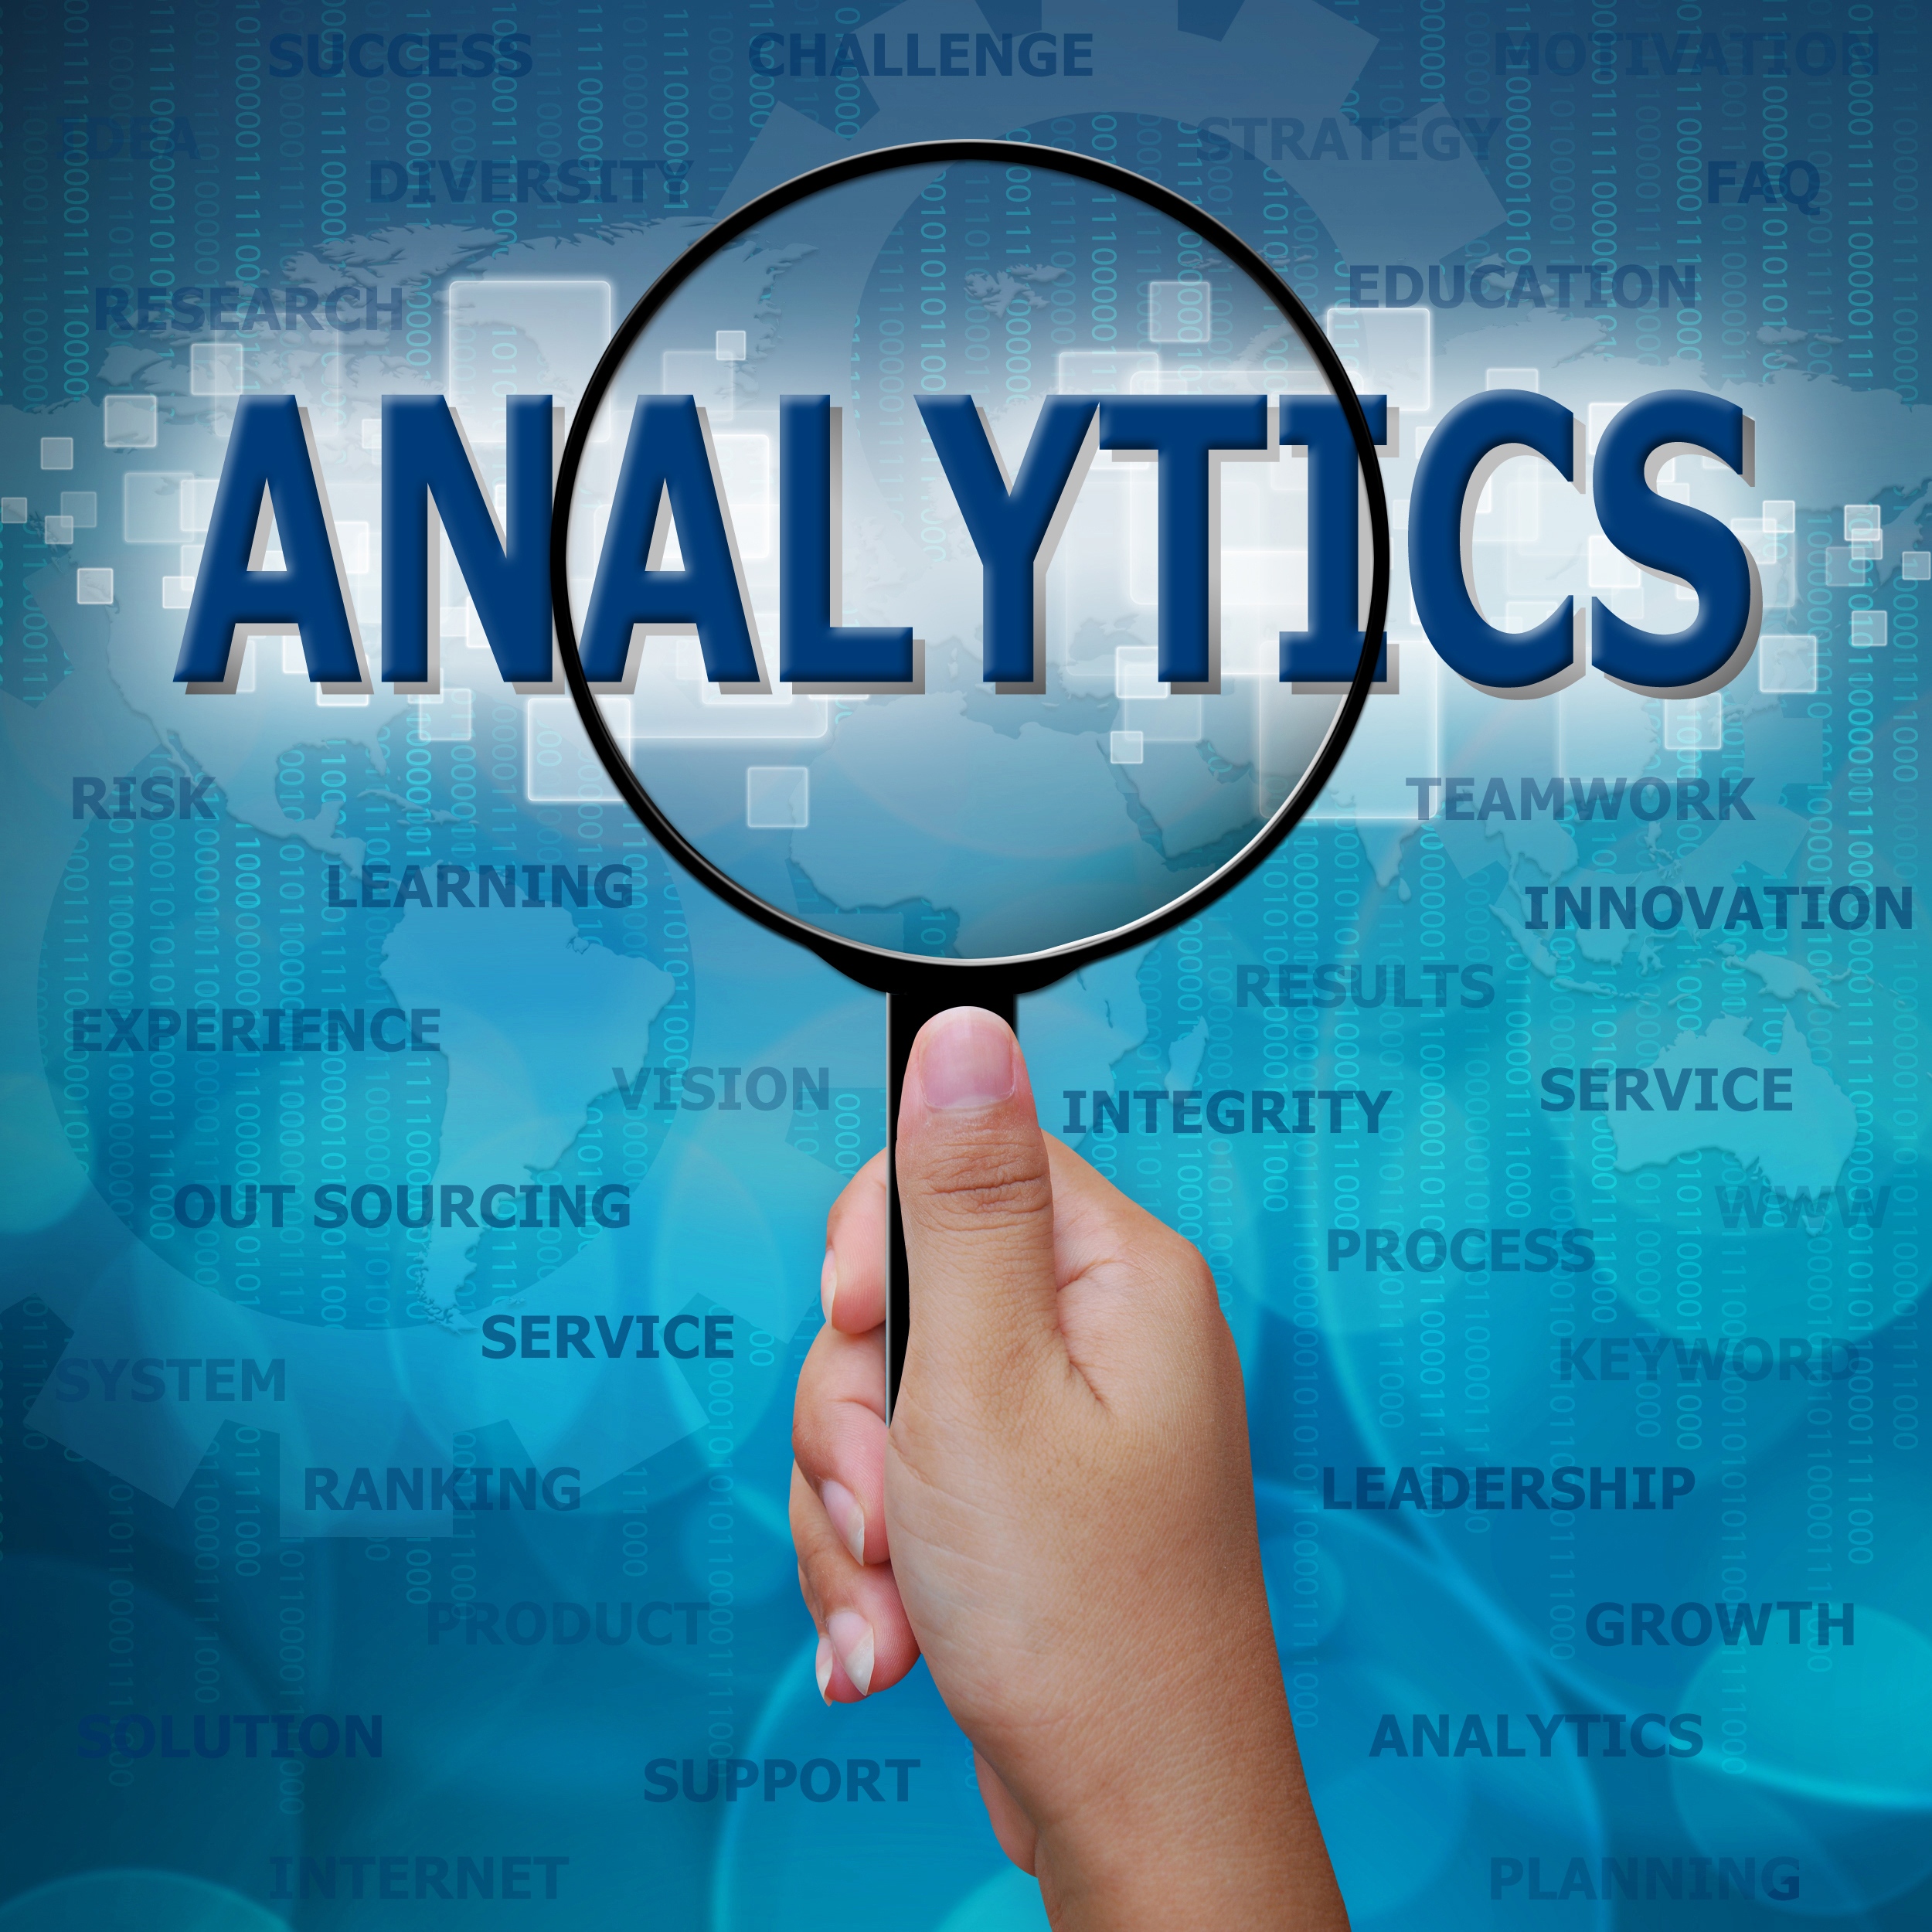 Image of Analytics with magnifying glass